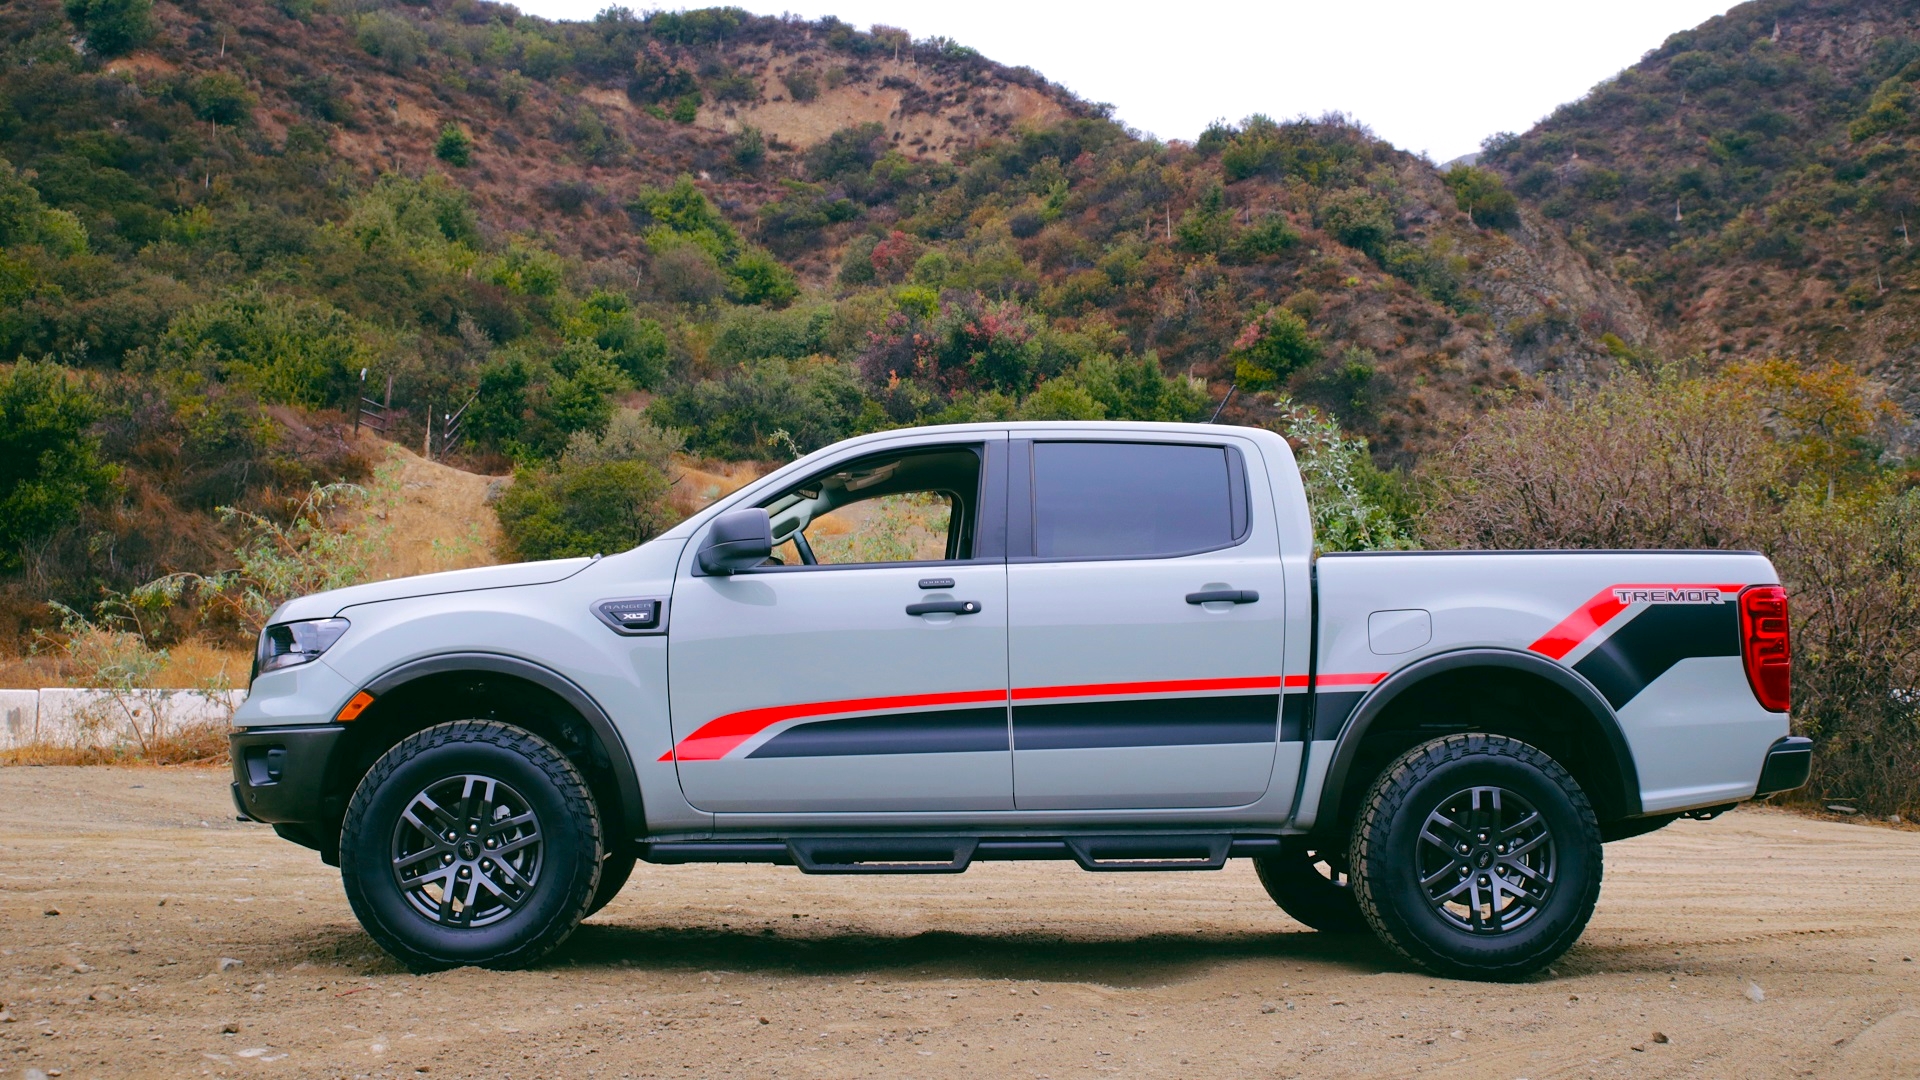 How to Make A Raptor-Style Ford Ranger With Aftermarket Parts